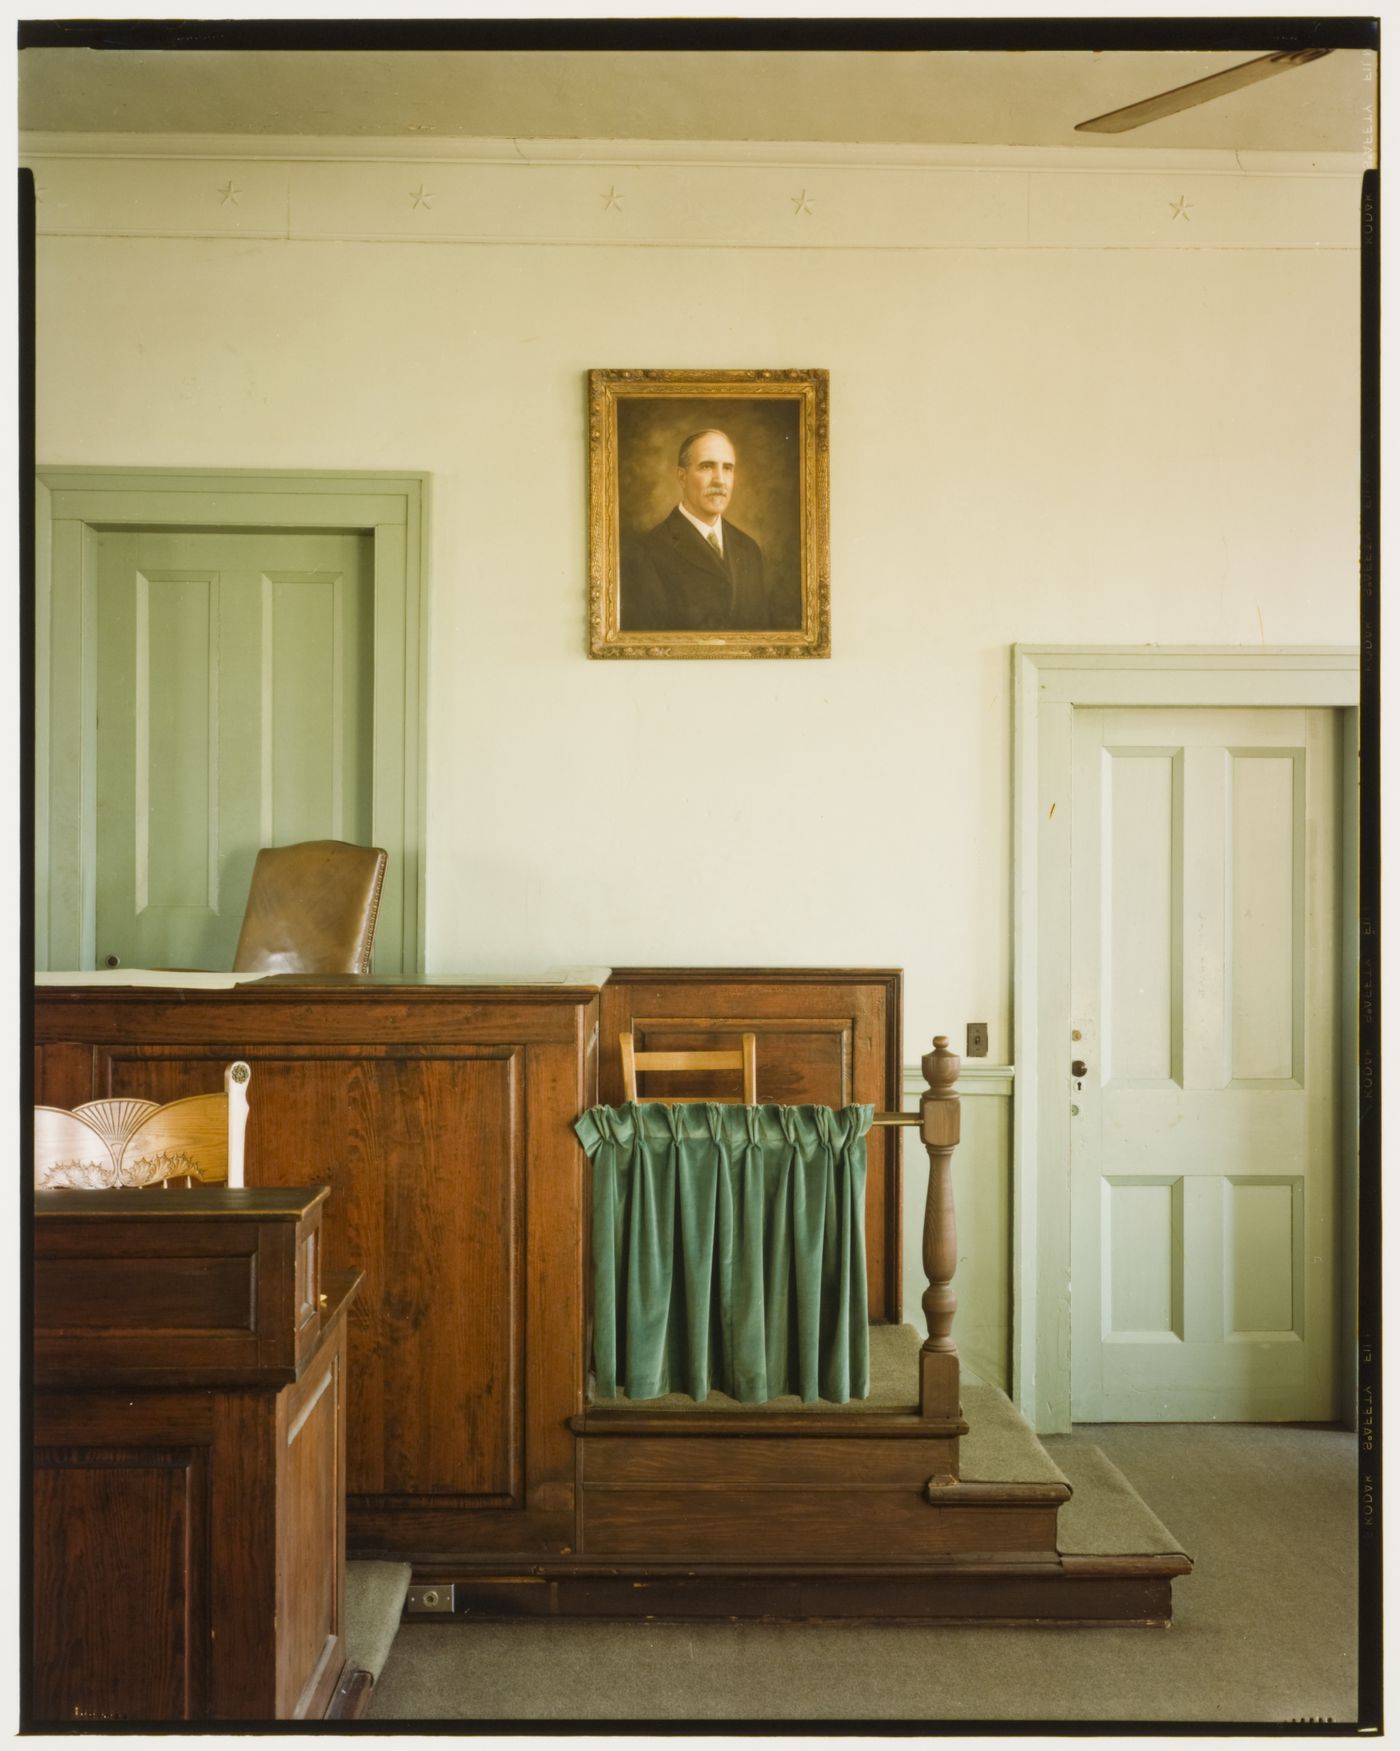 Interior view of the courtroom showing the witness stand and judge's bench, Greene County Courthouse, Greensboro, Georgia, United States